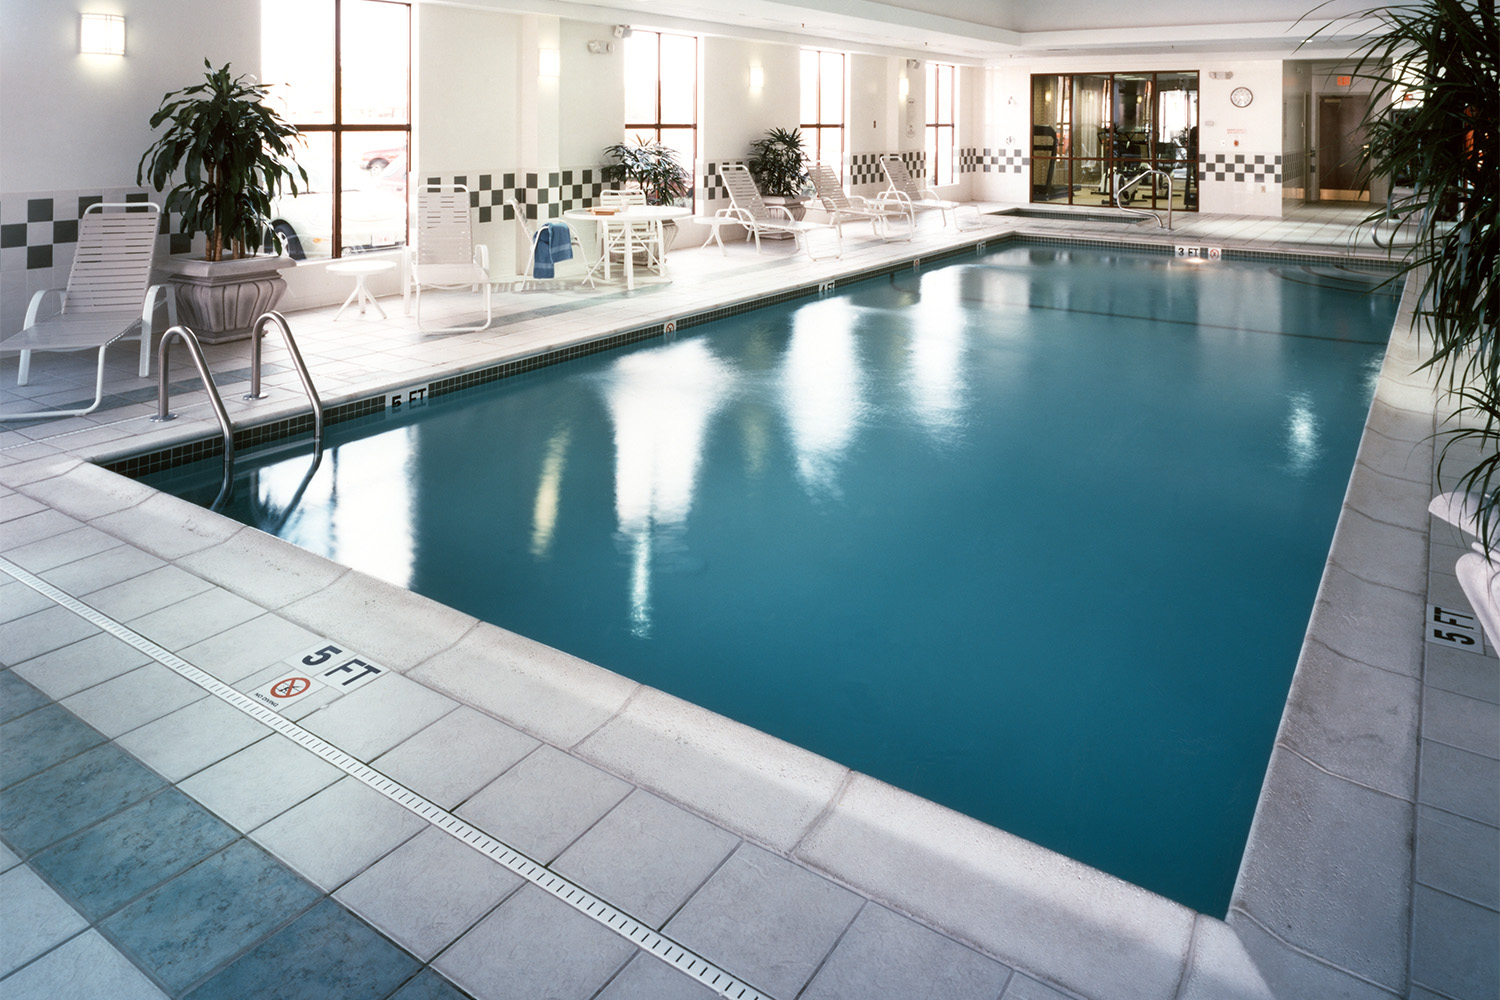 long indoor swimming pool at the DoubleTree hotel 